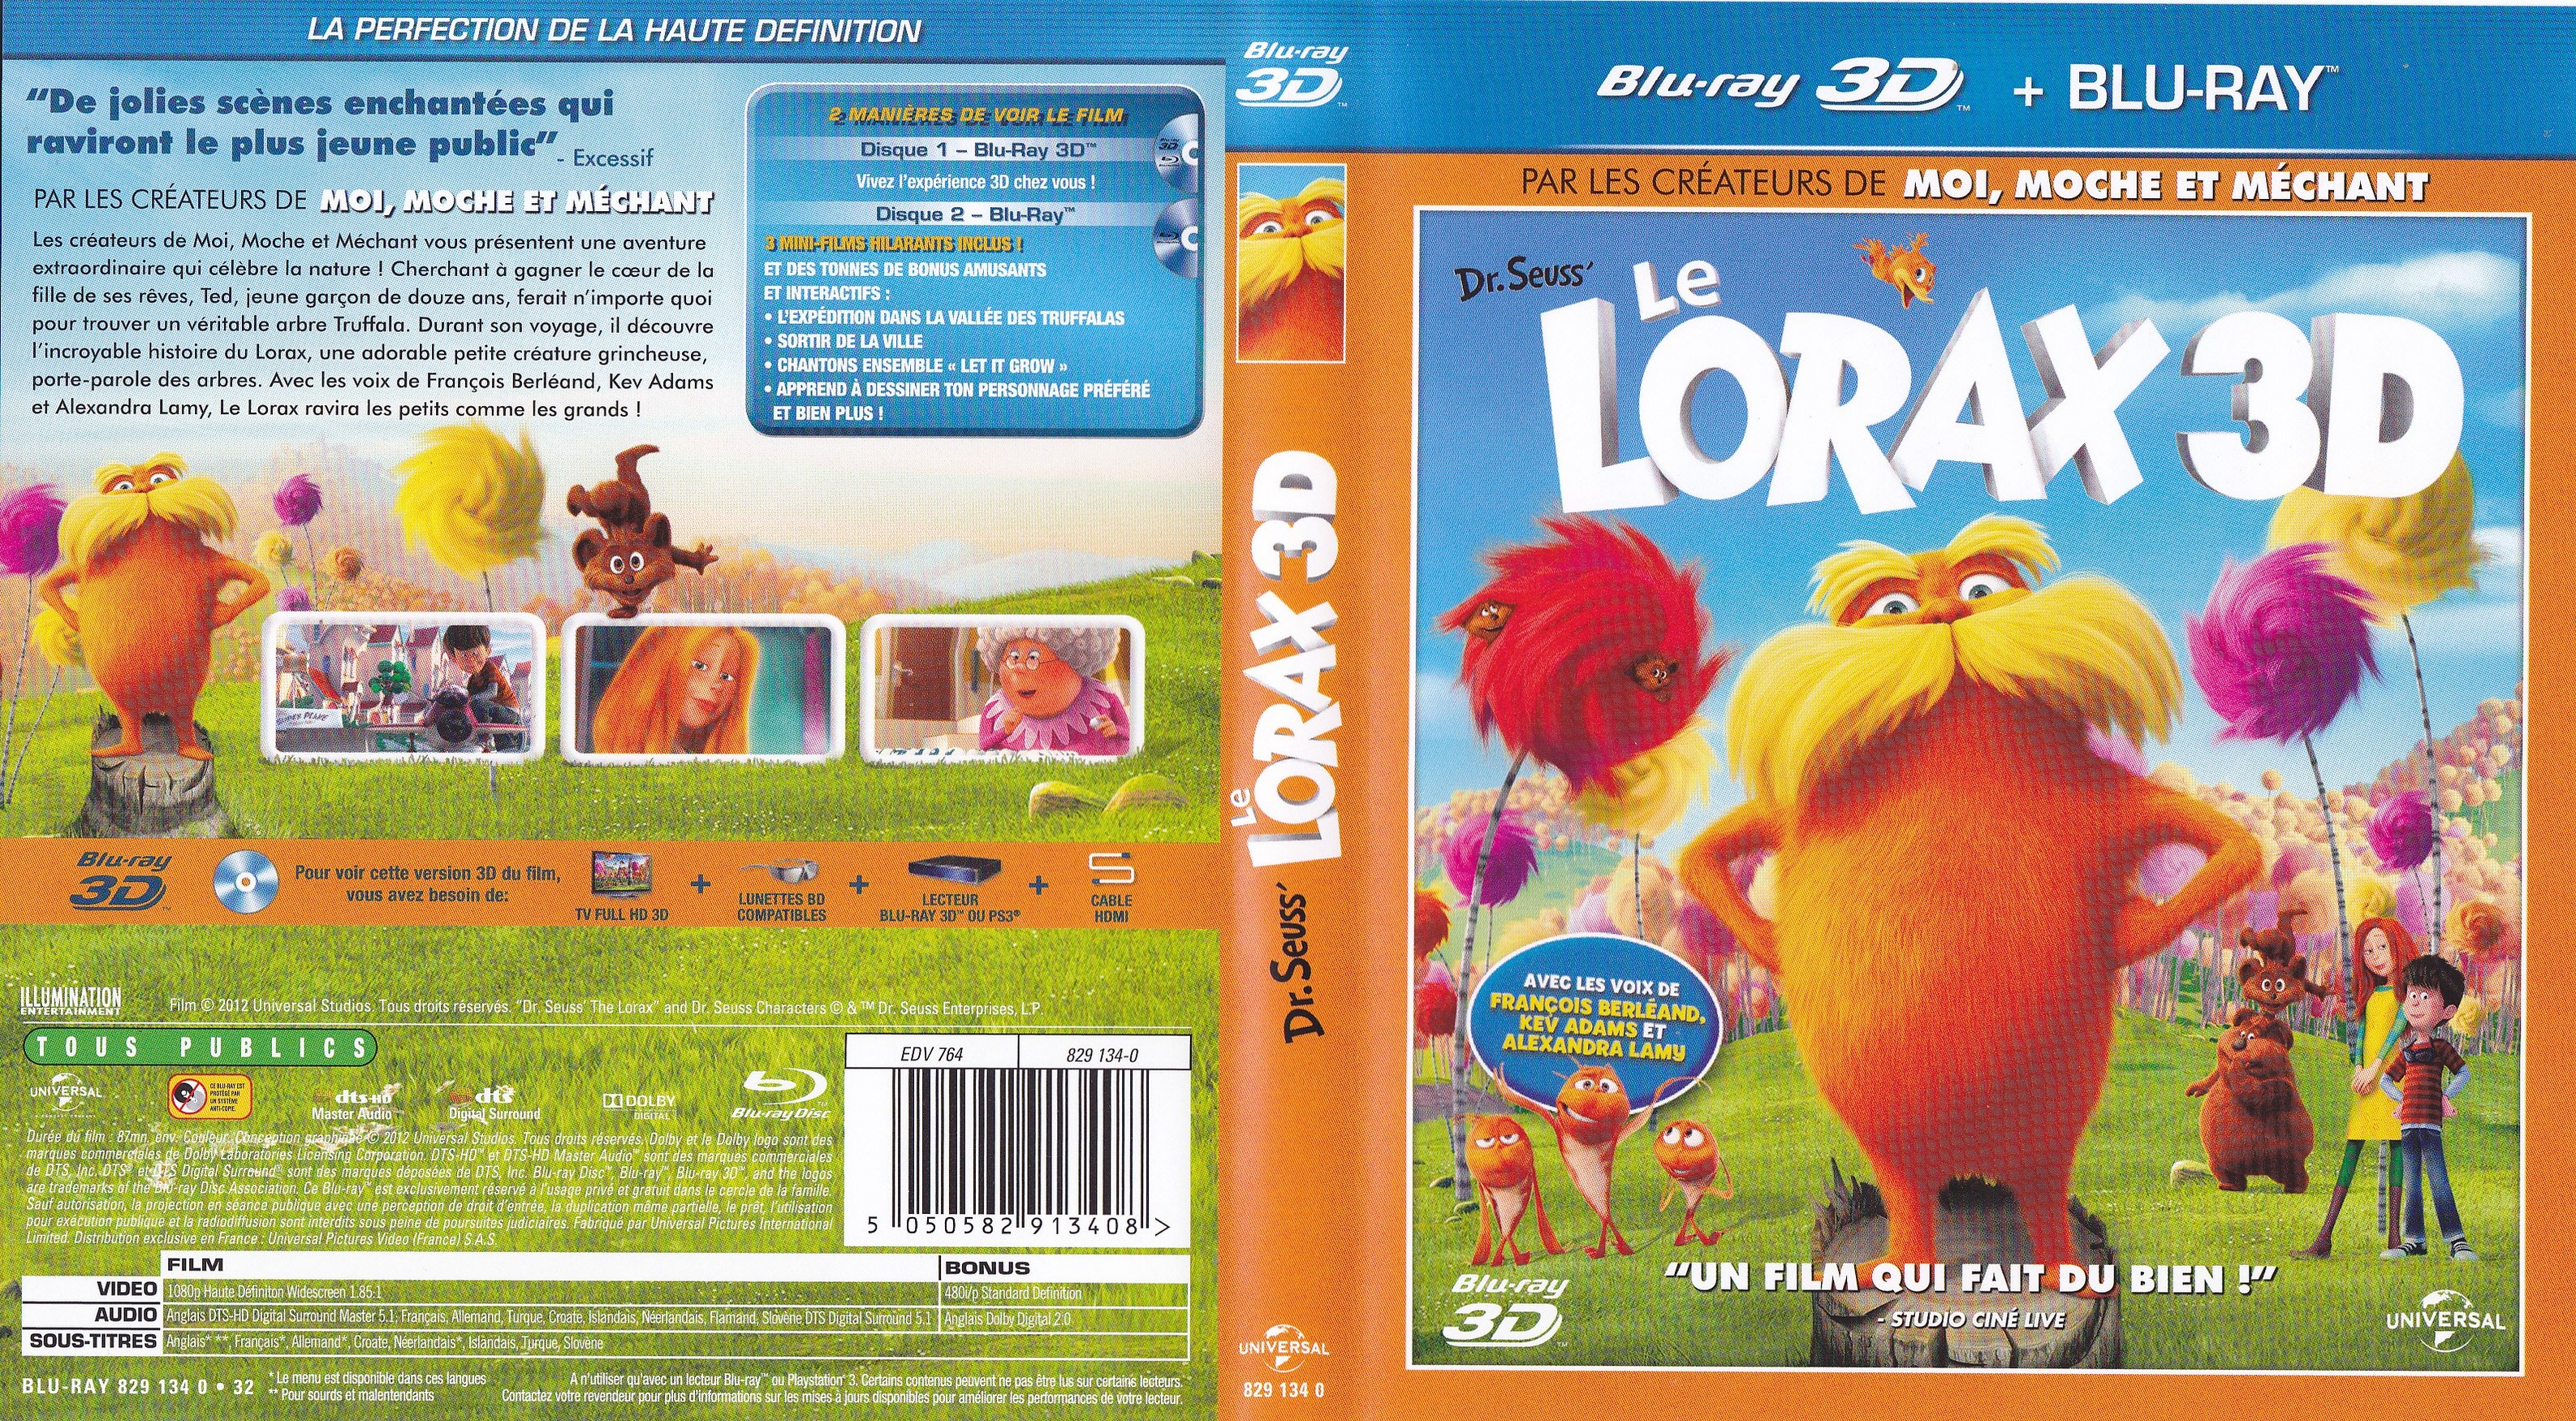 Jaquette DVD Le lorax (BLU-RAY)